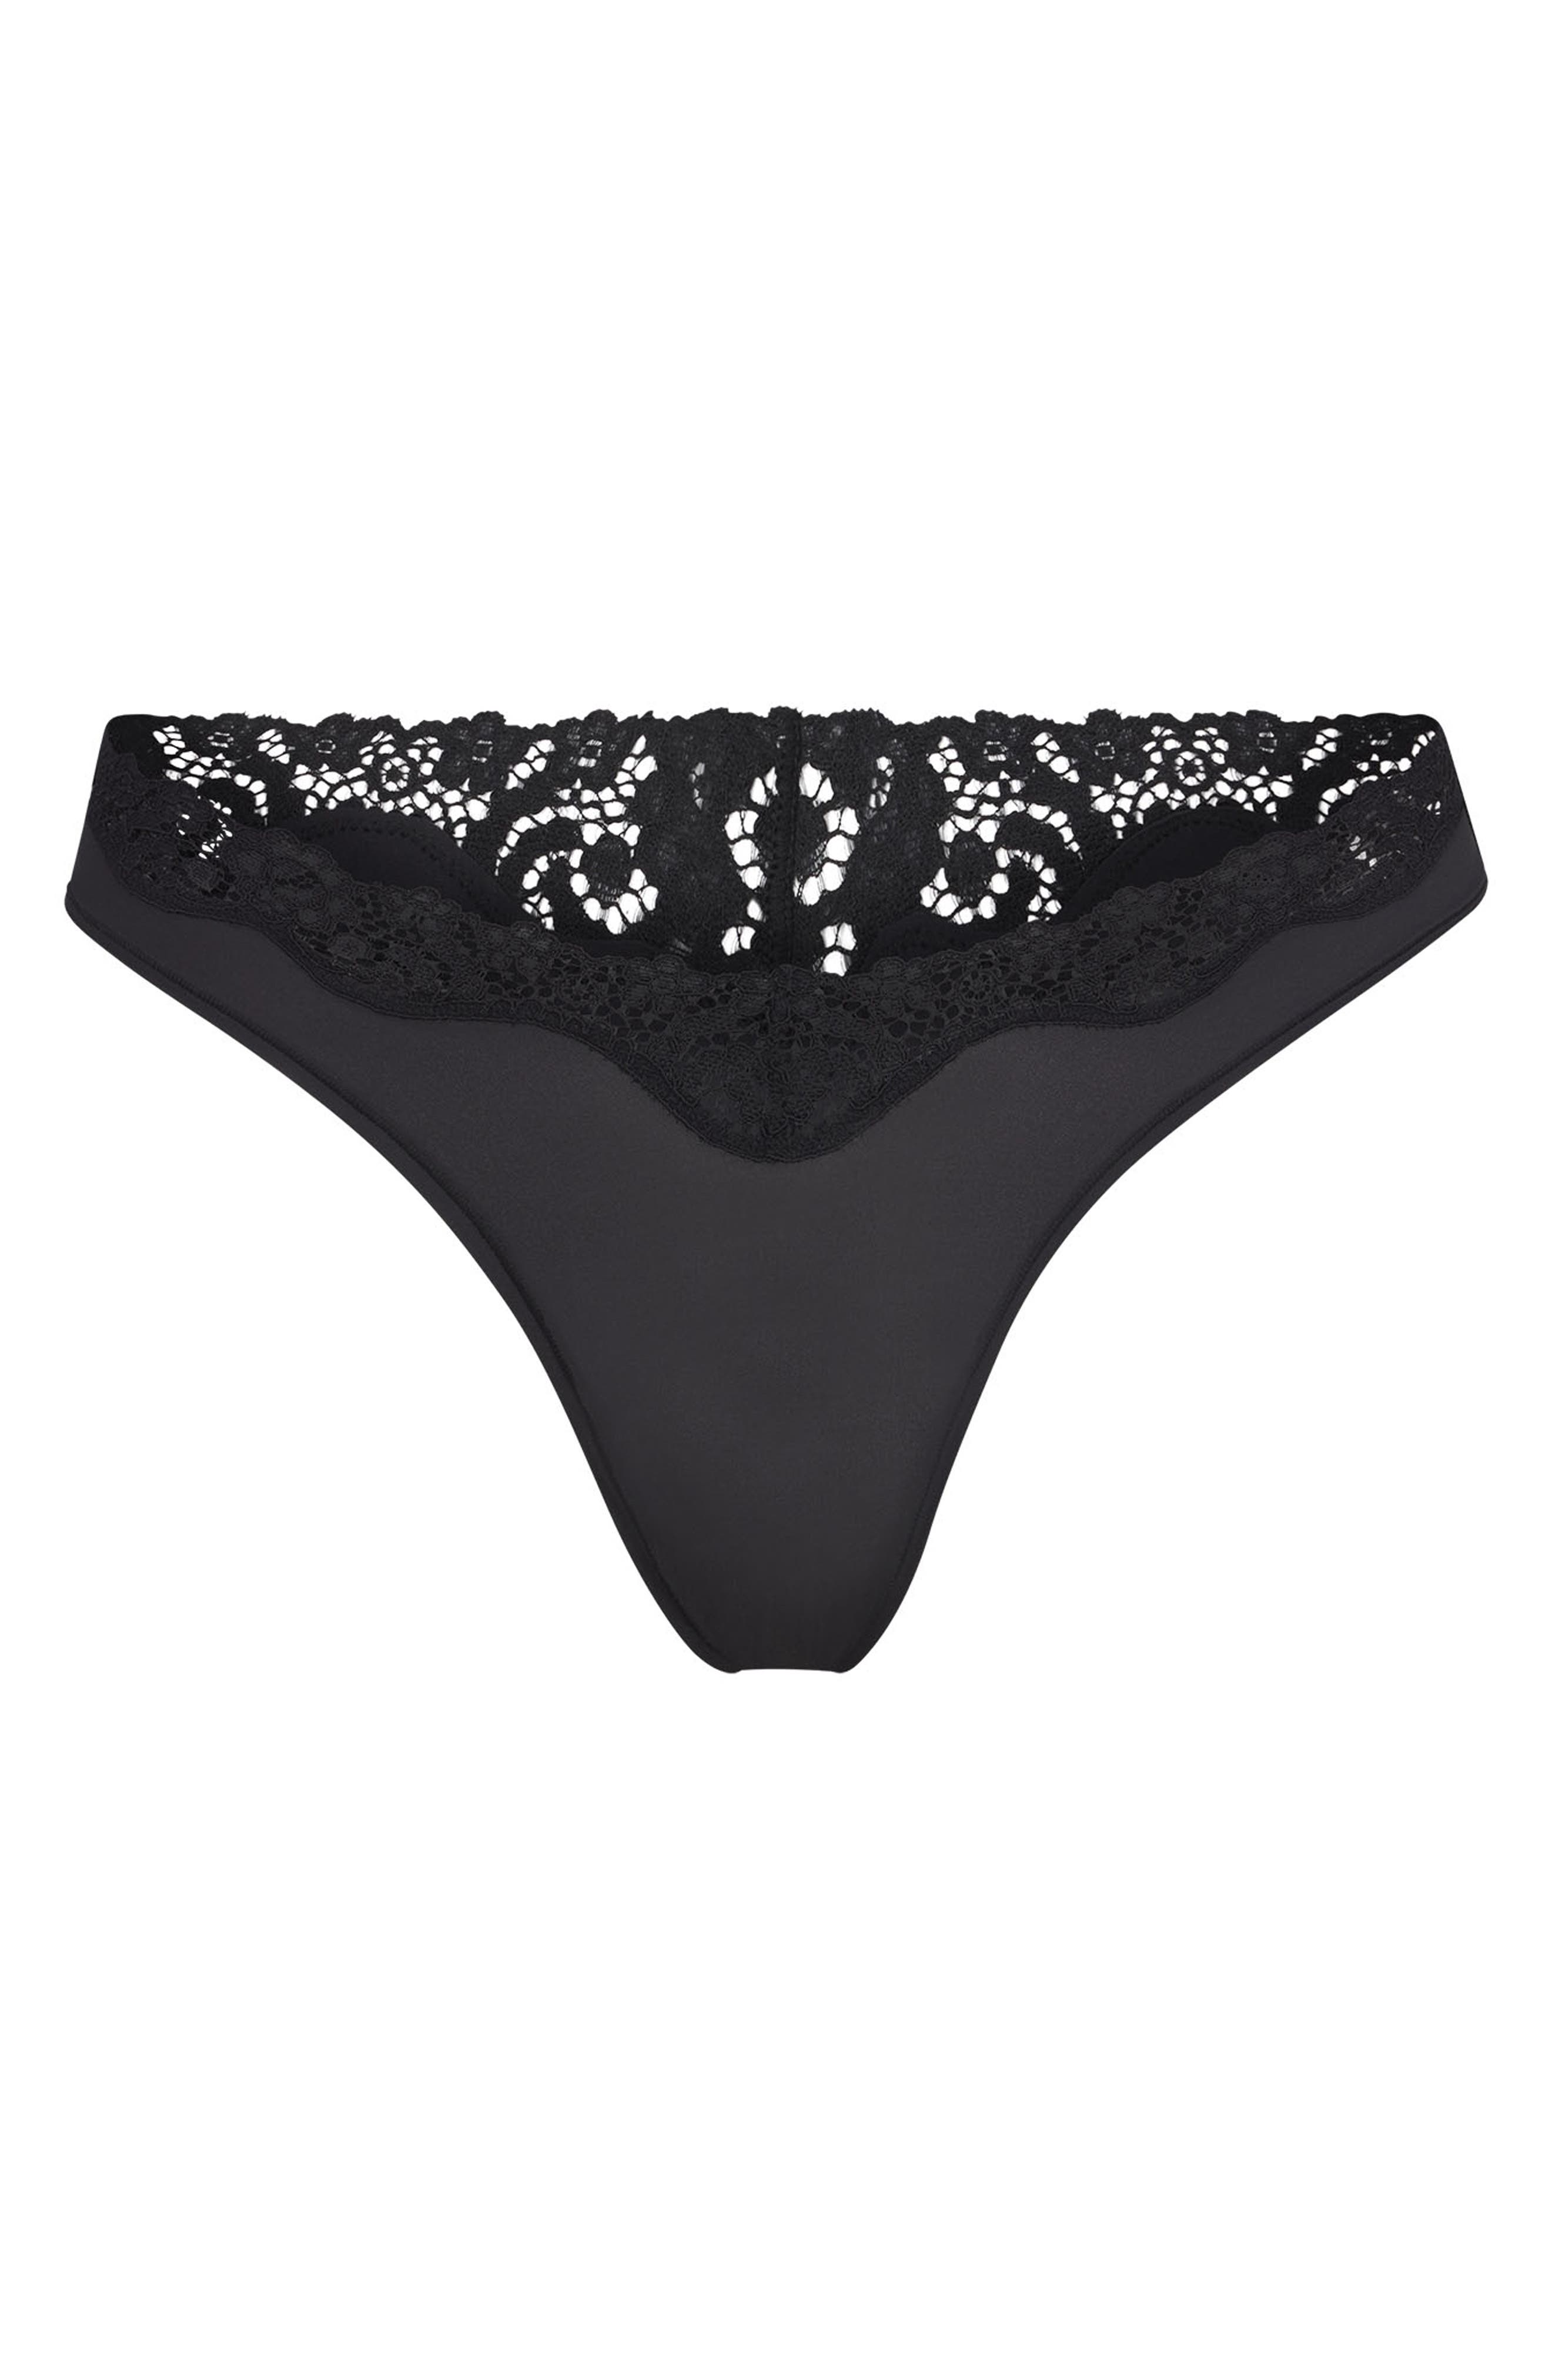 SKIMS Fits Everybody Lace Thong in Onyx